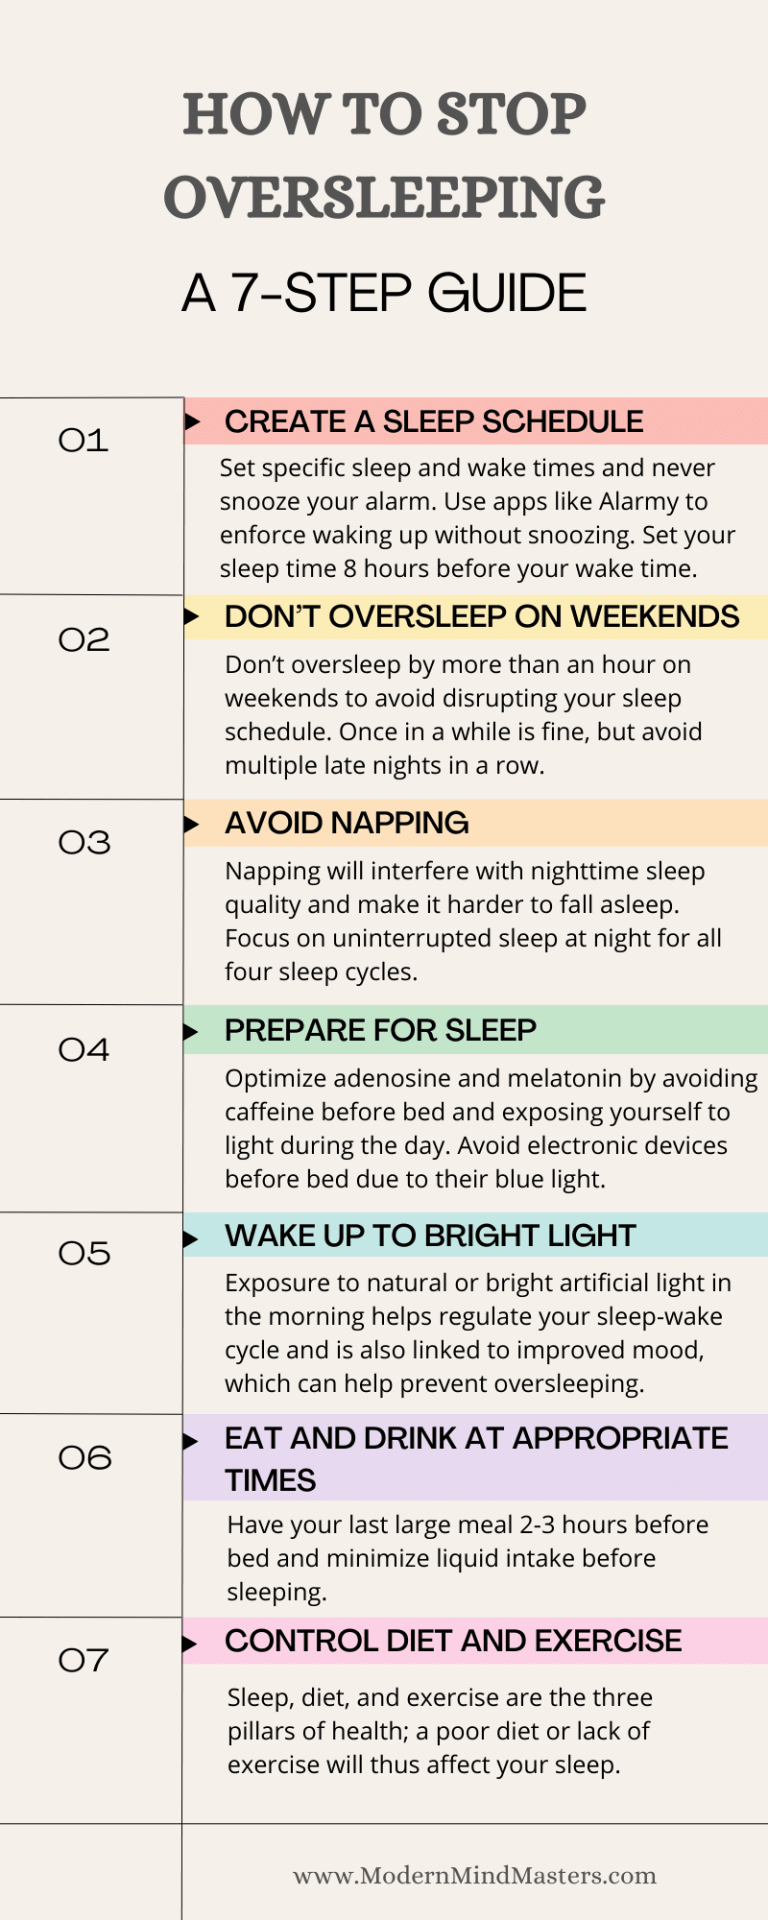 Follow this 7-step guide to stop oversleeping